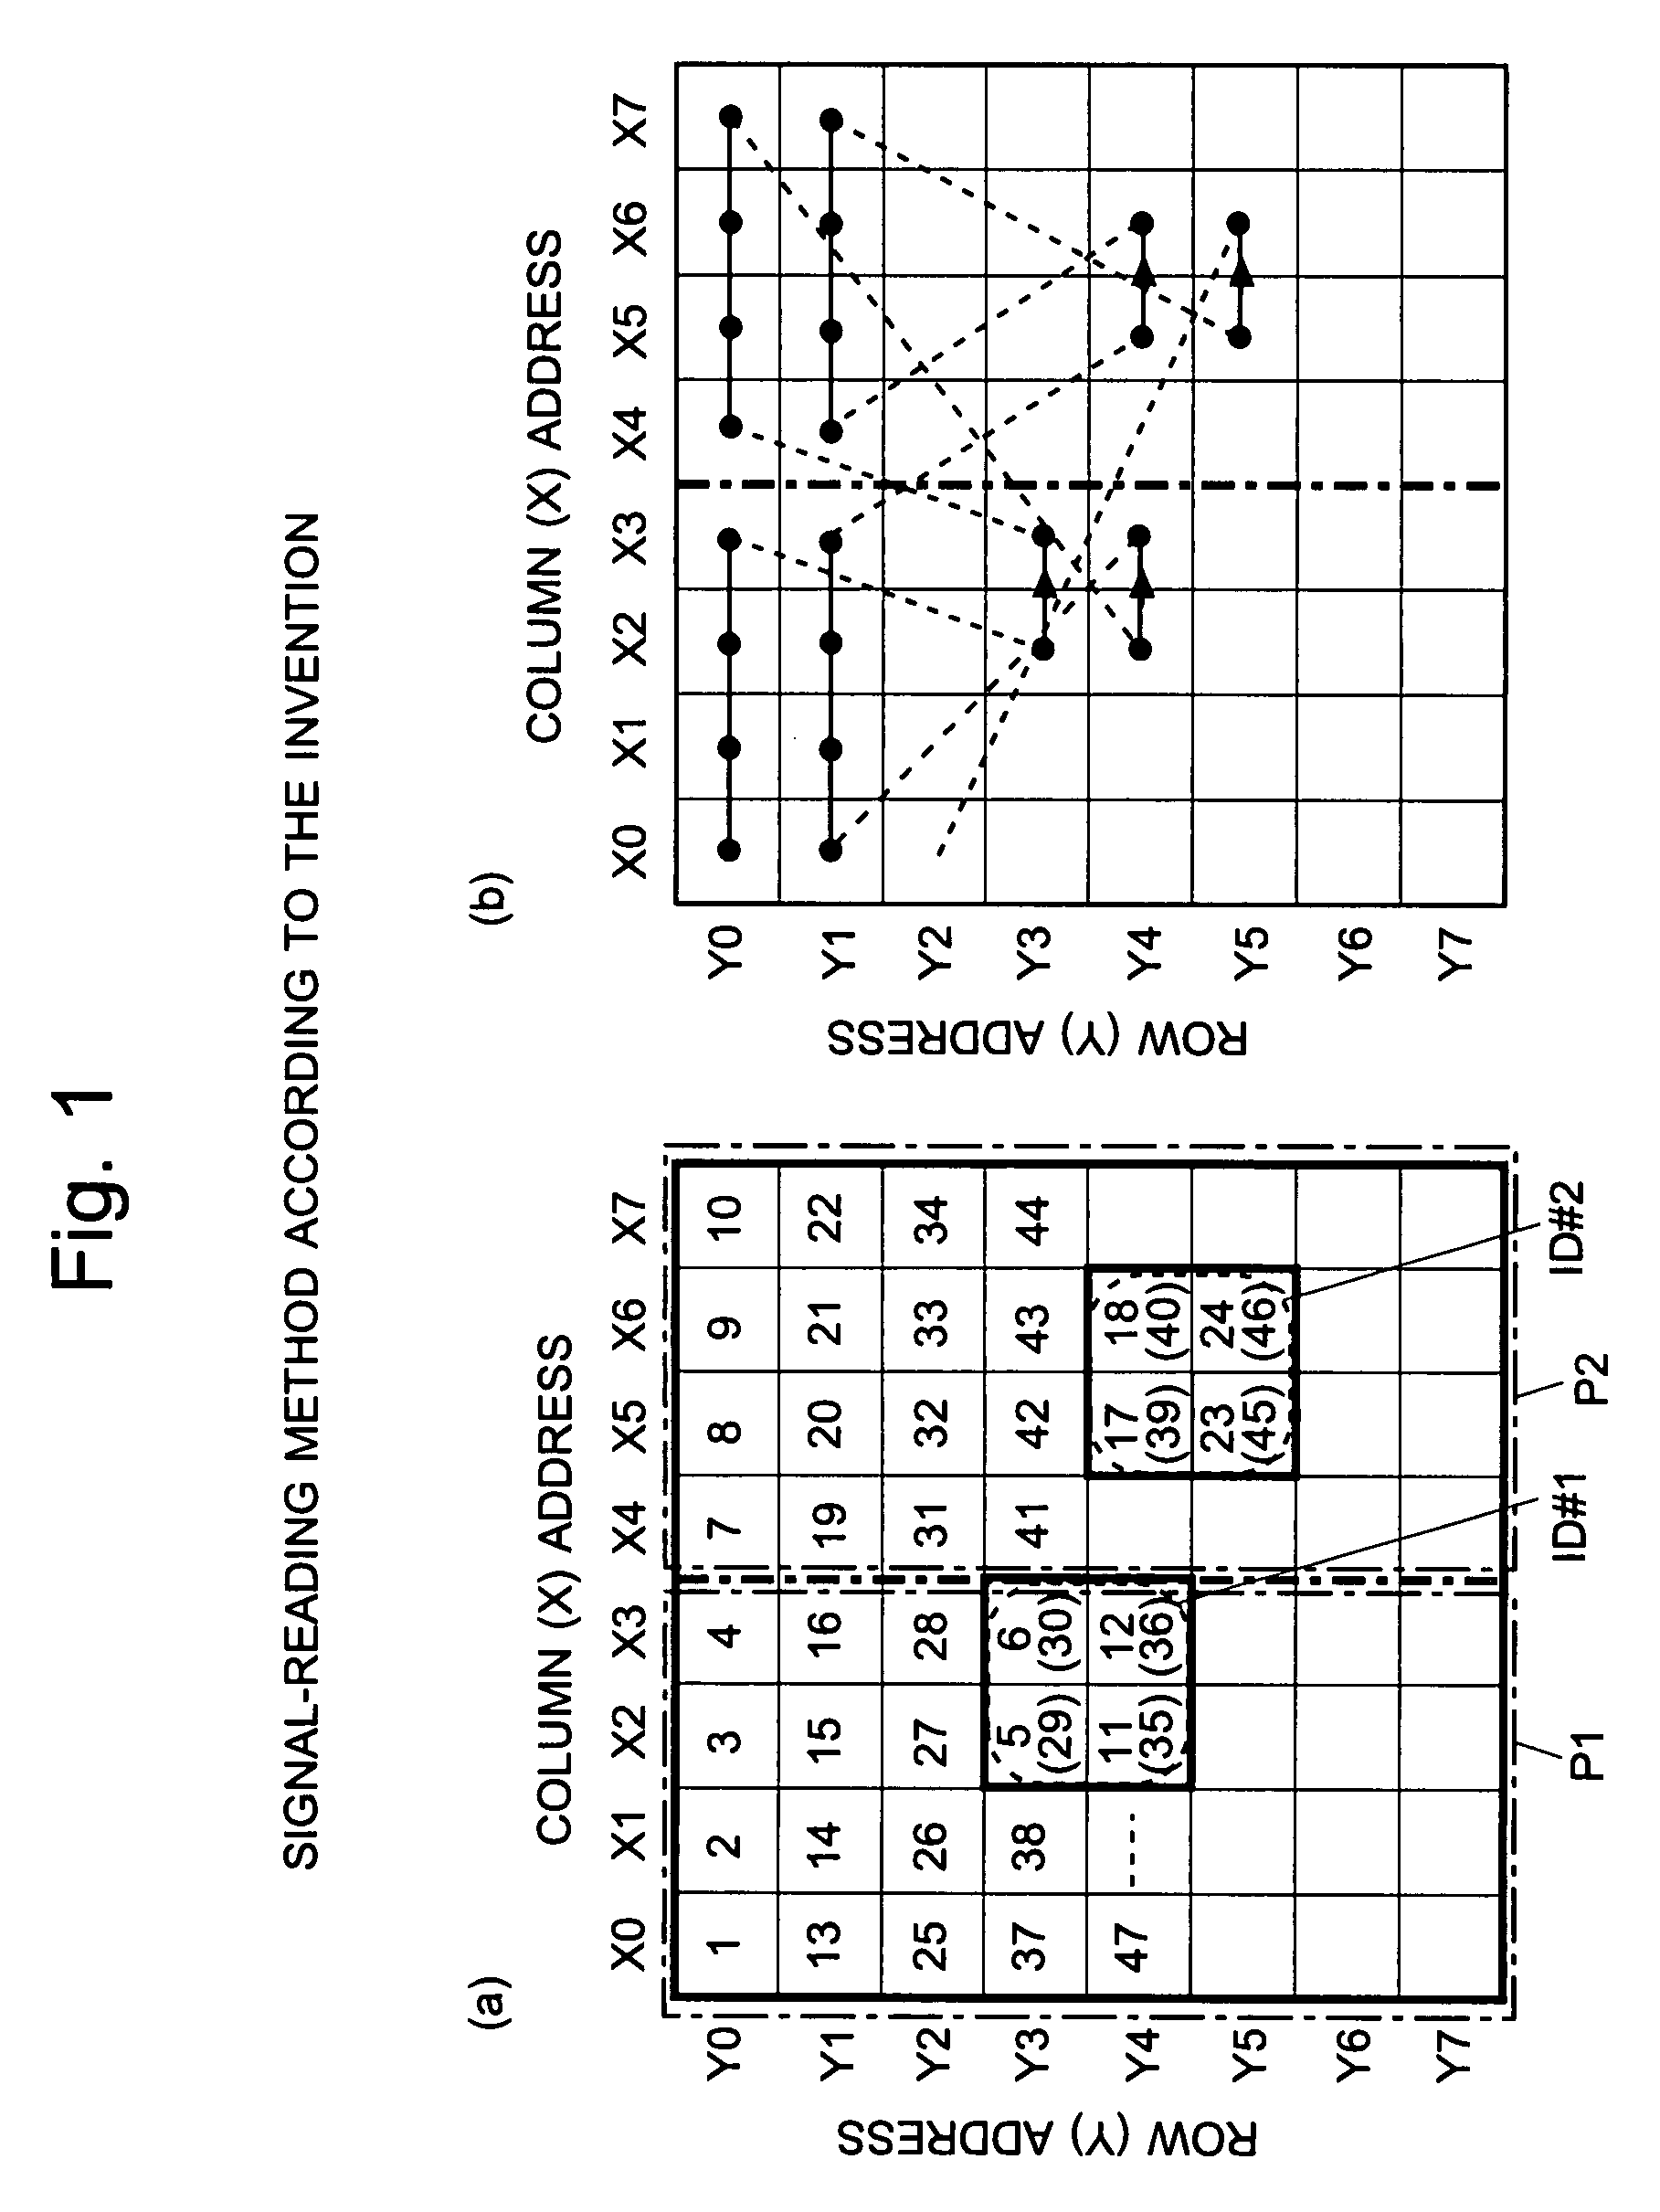 Imaging device and method for reading signals from such device